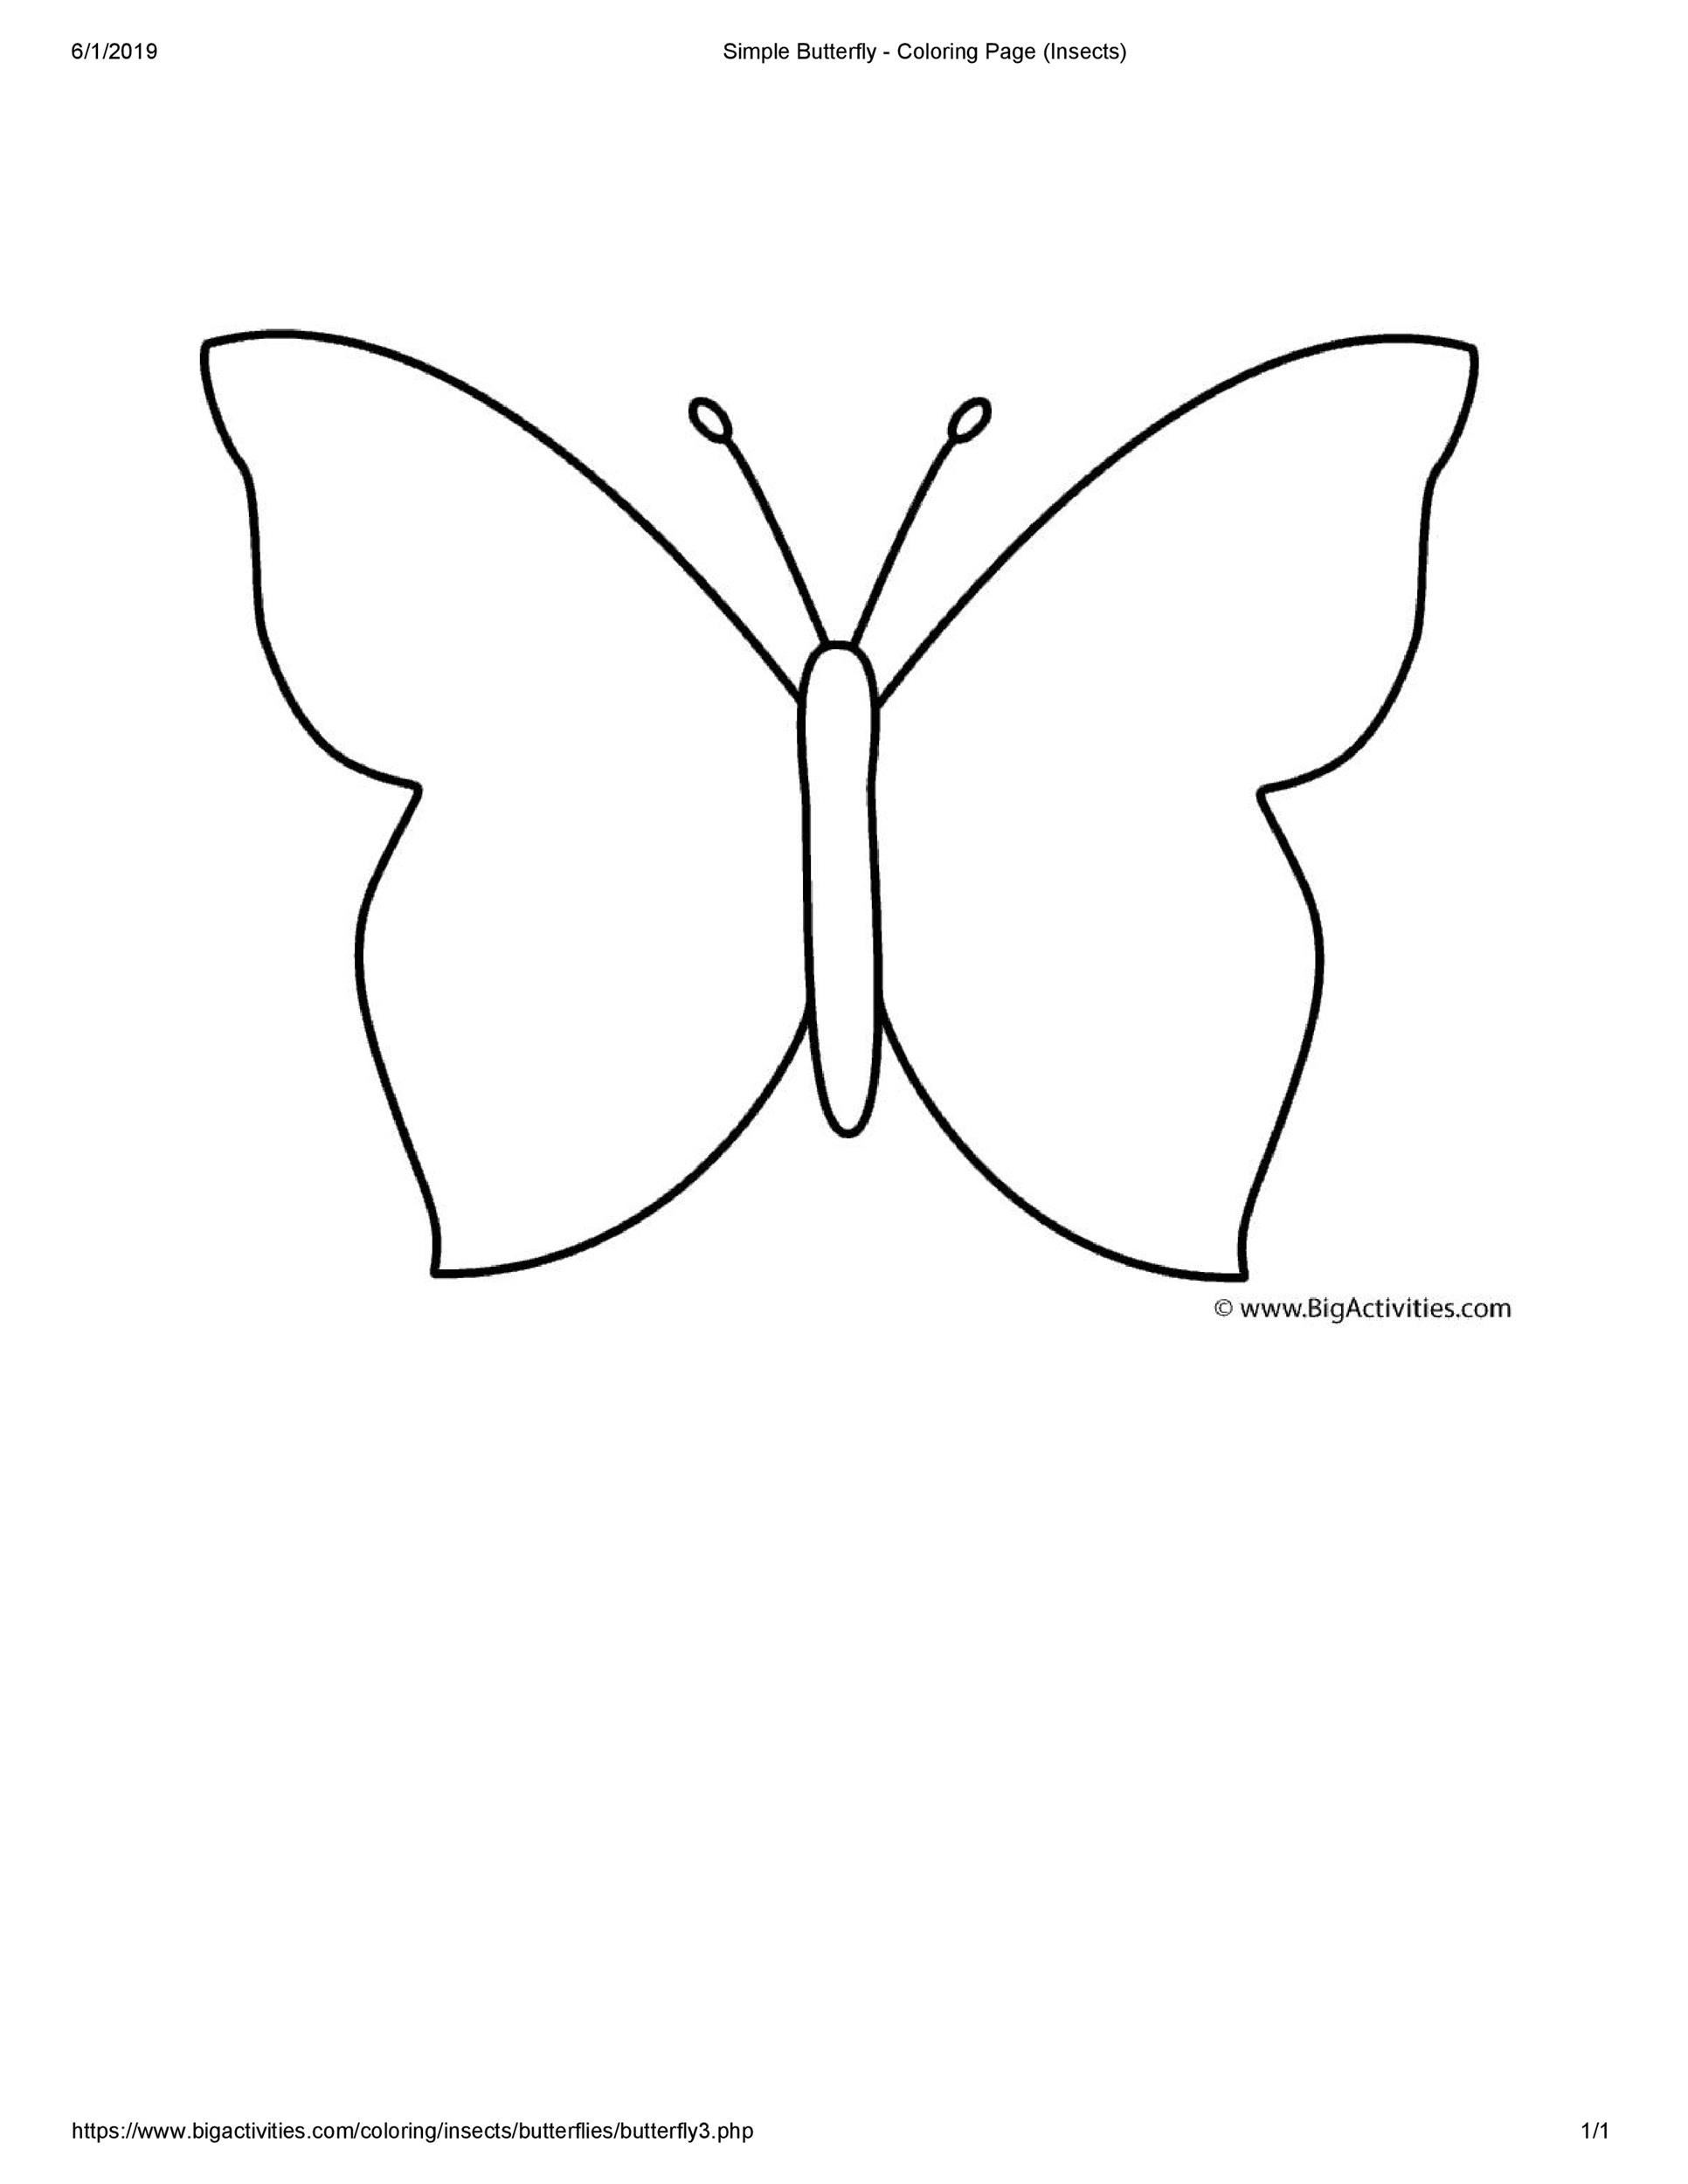 Printable Cut Out Butterfly Template Printable Templates